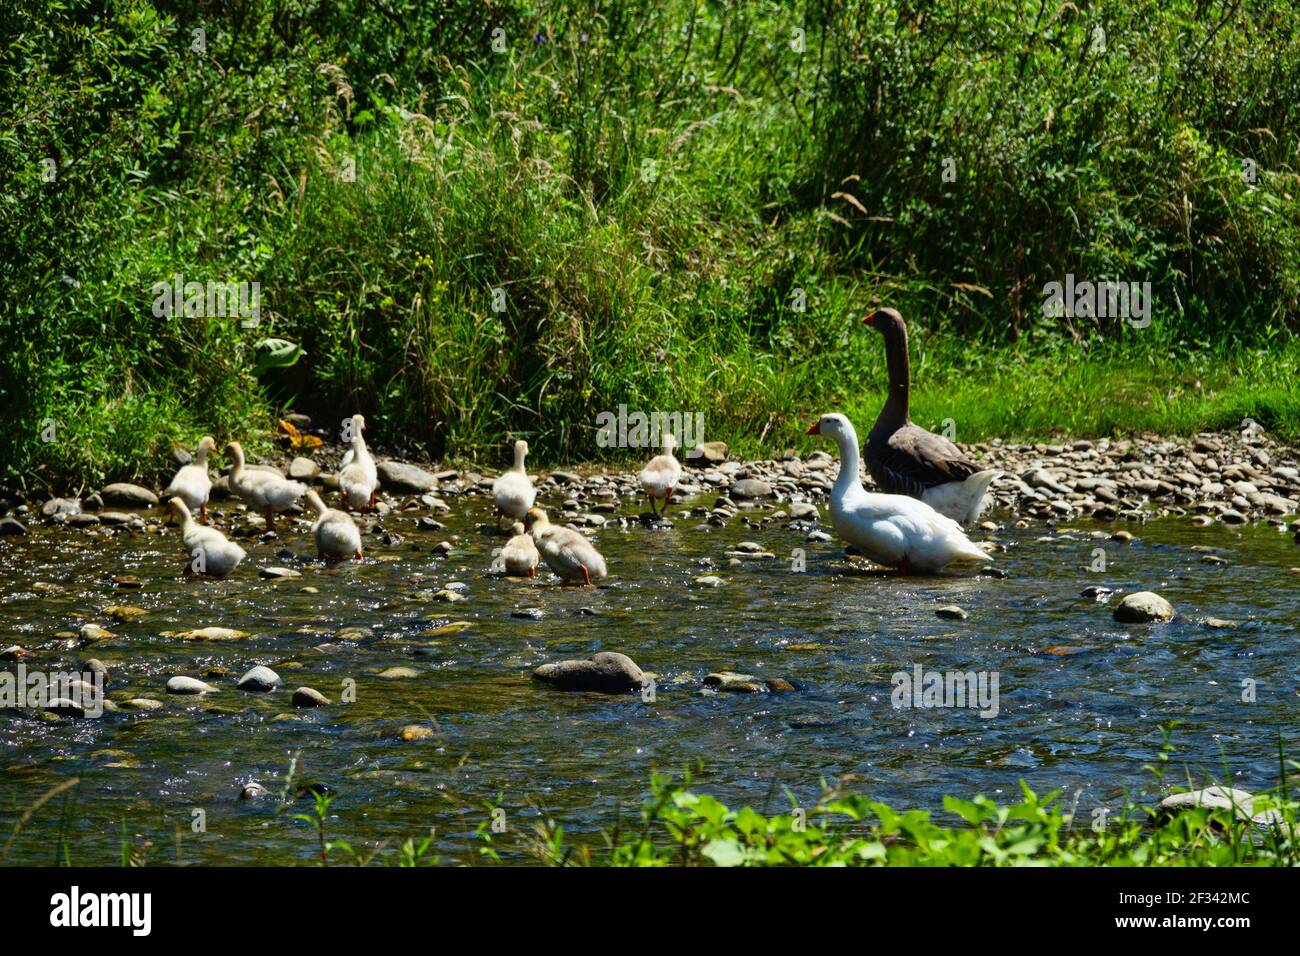 White goose and dark gander with a brood of hybrid goslings in a meadow by the river. Goose pasture (grass plucked), geese farming. Stock Photo